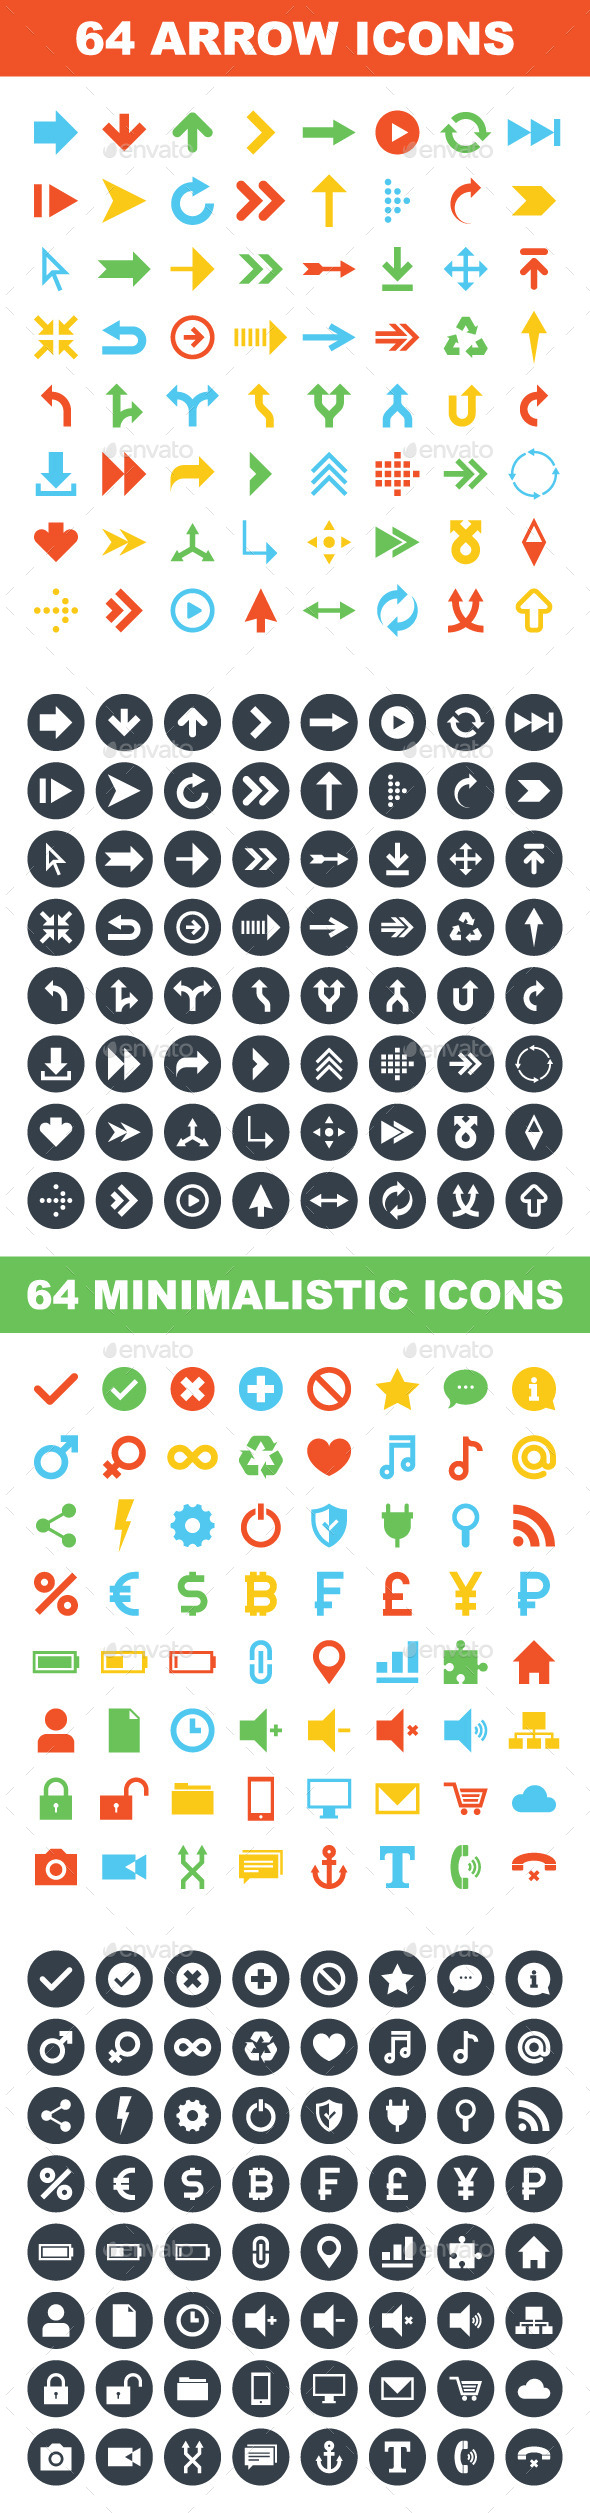 Simple Web Icons